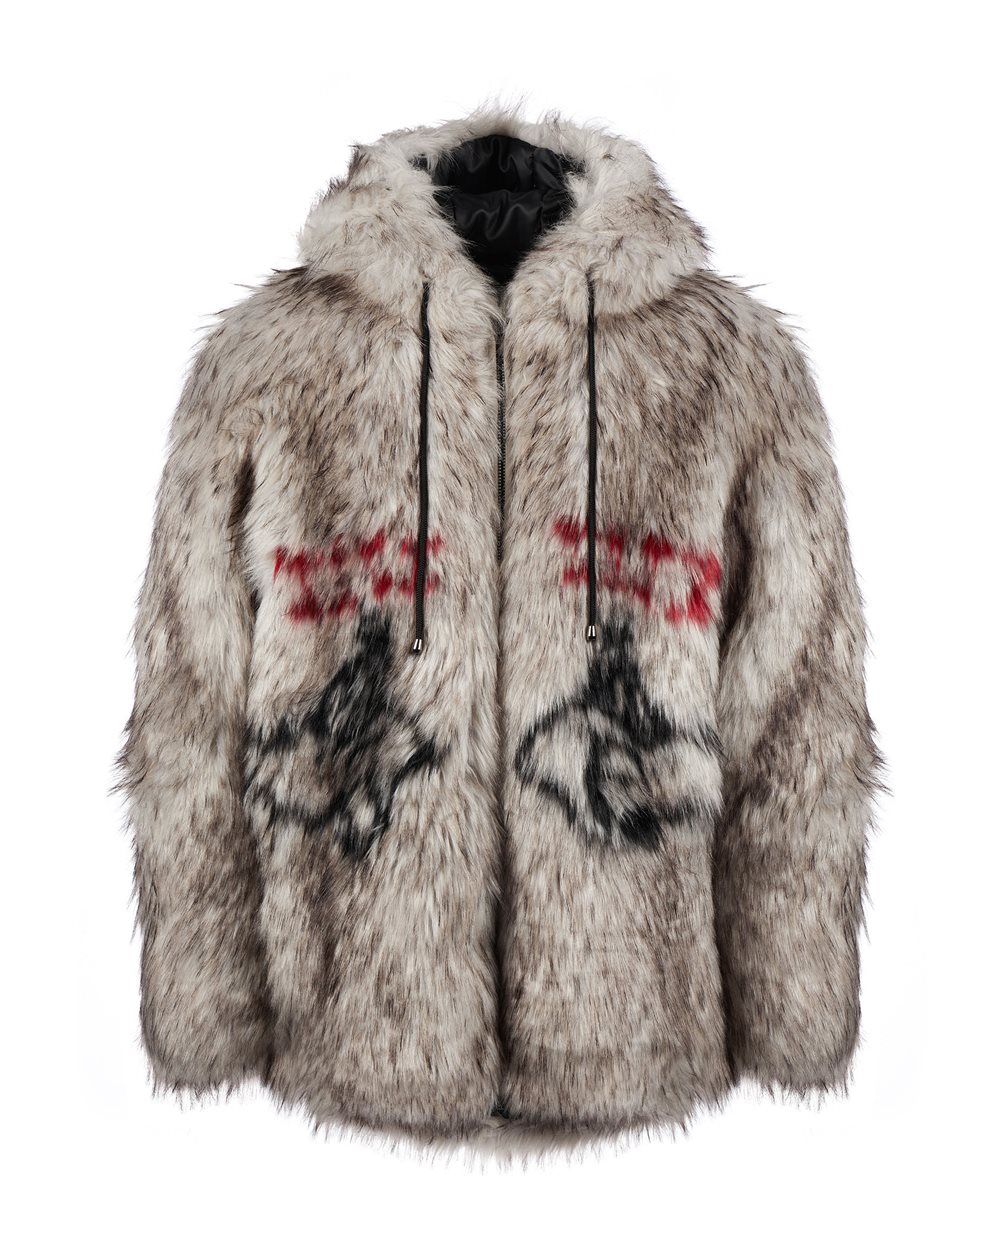 Eco-fur jacket with cartoon details - Fashion Show Man | Iceberg - Official Website